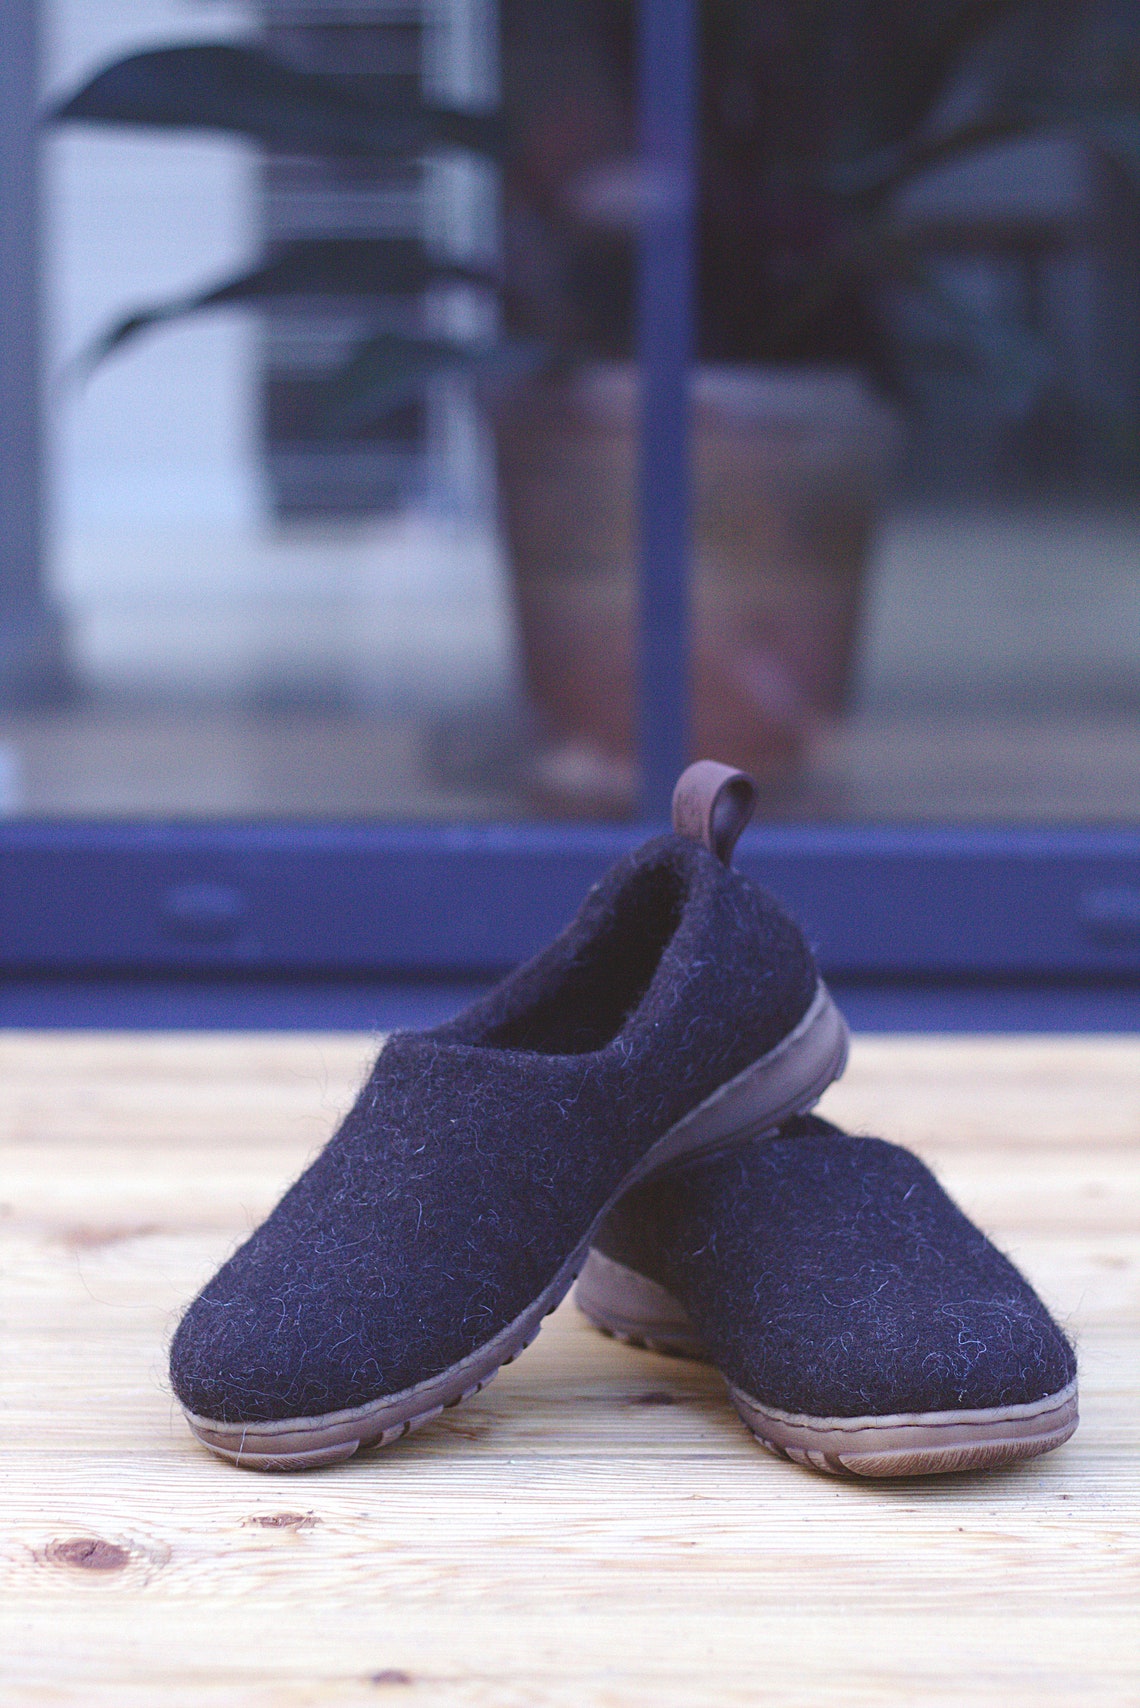 Cappuccino minimalist shoes felted boiled wool clogs | Etsy